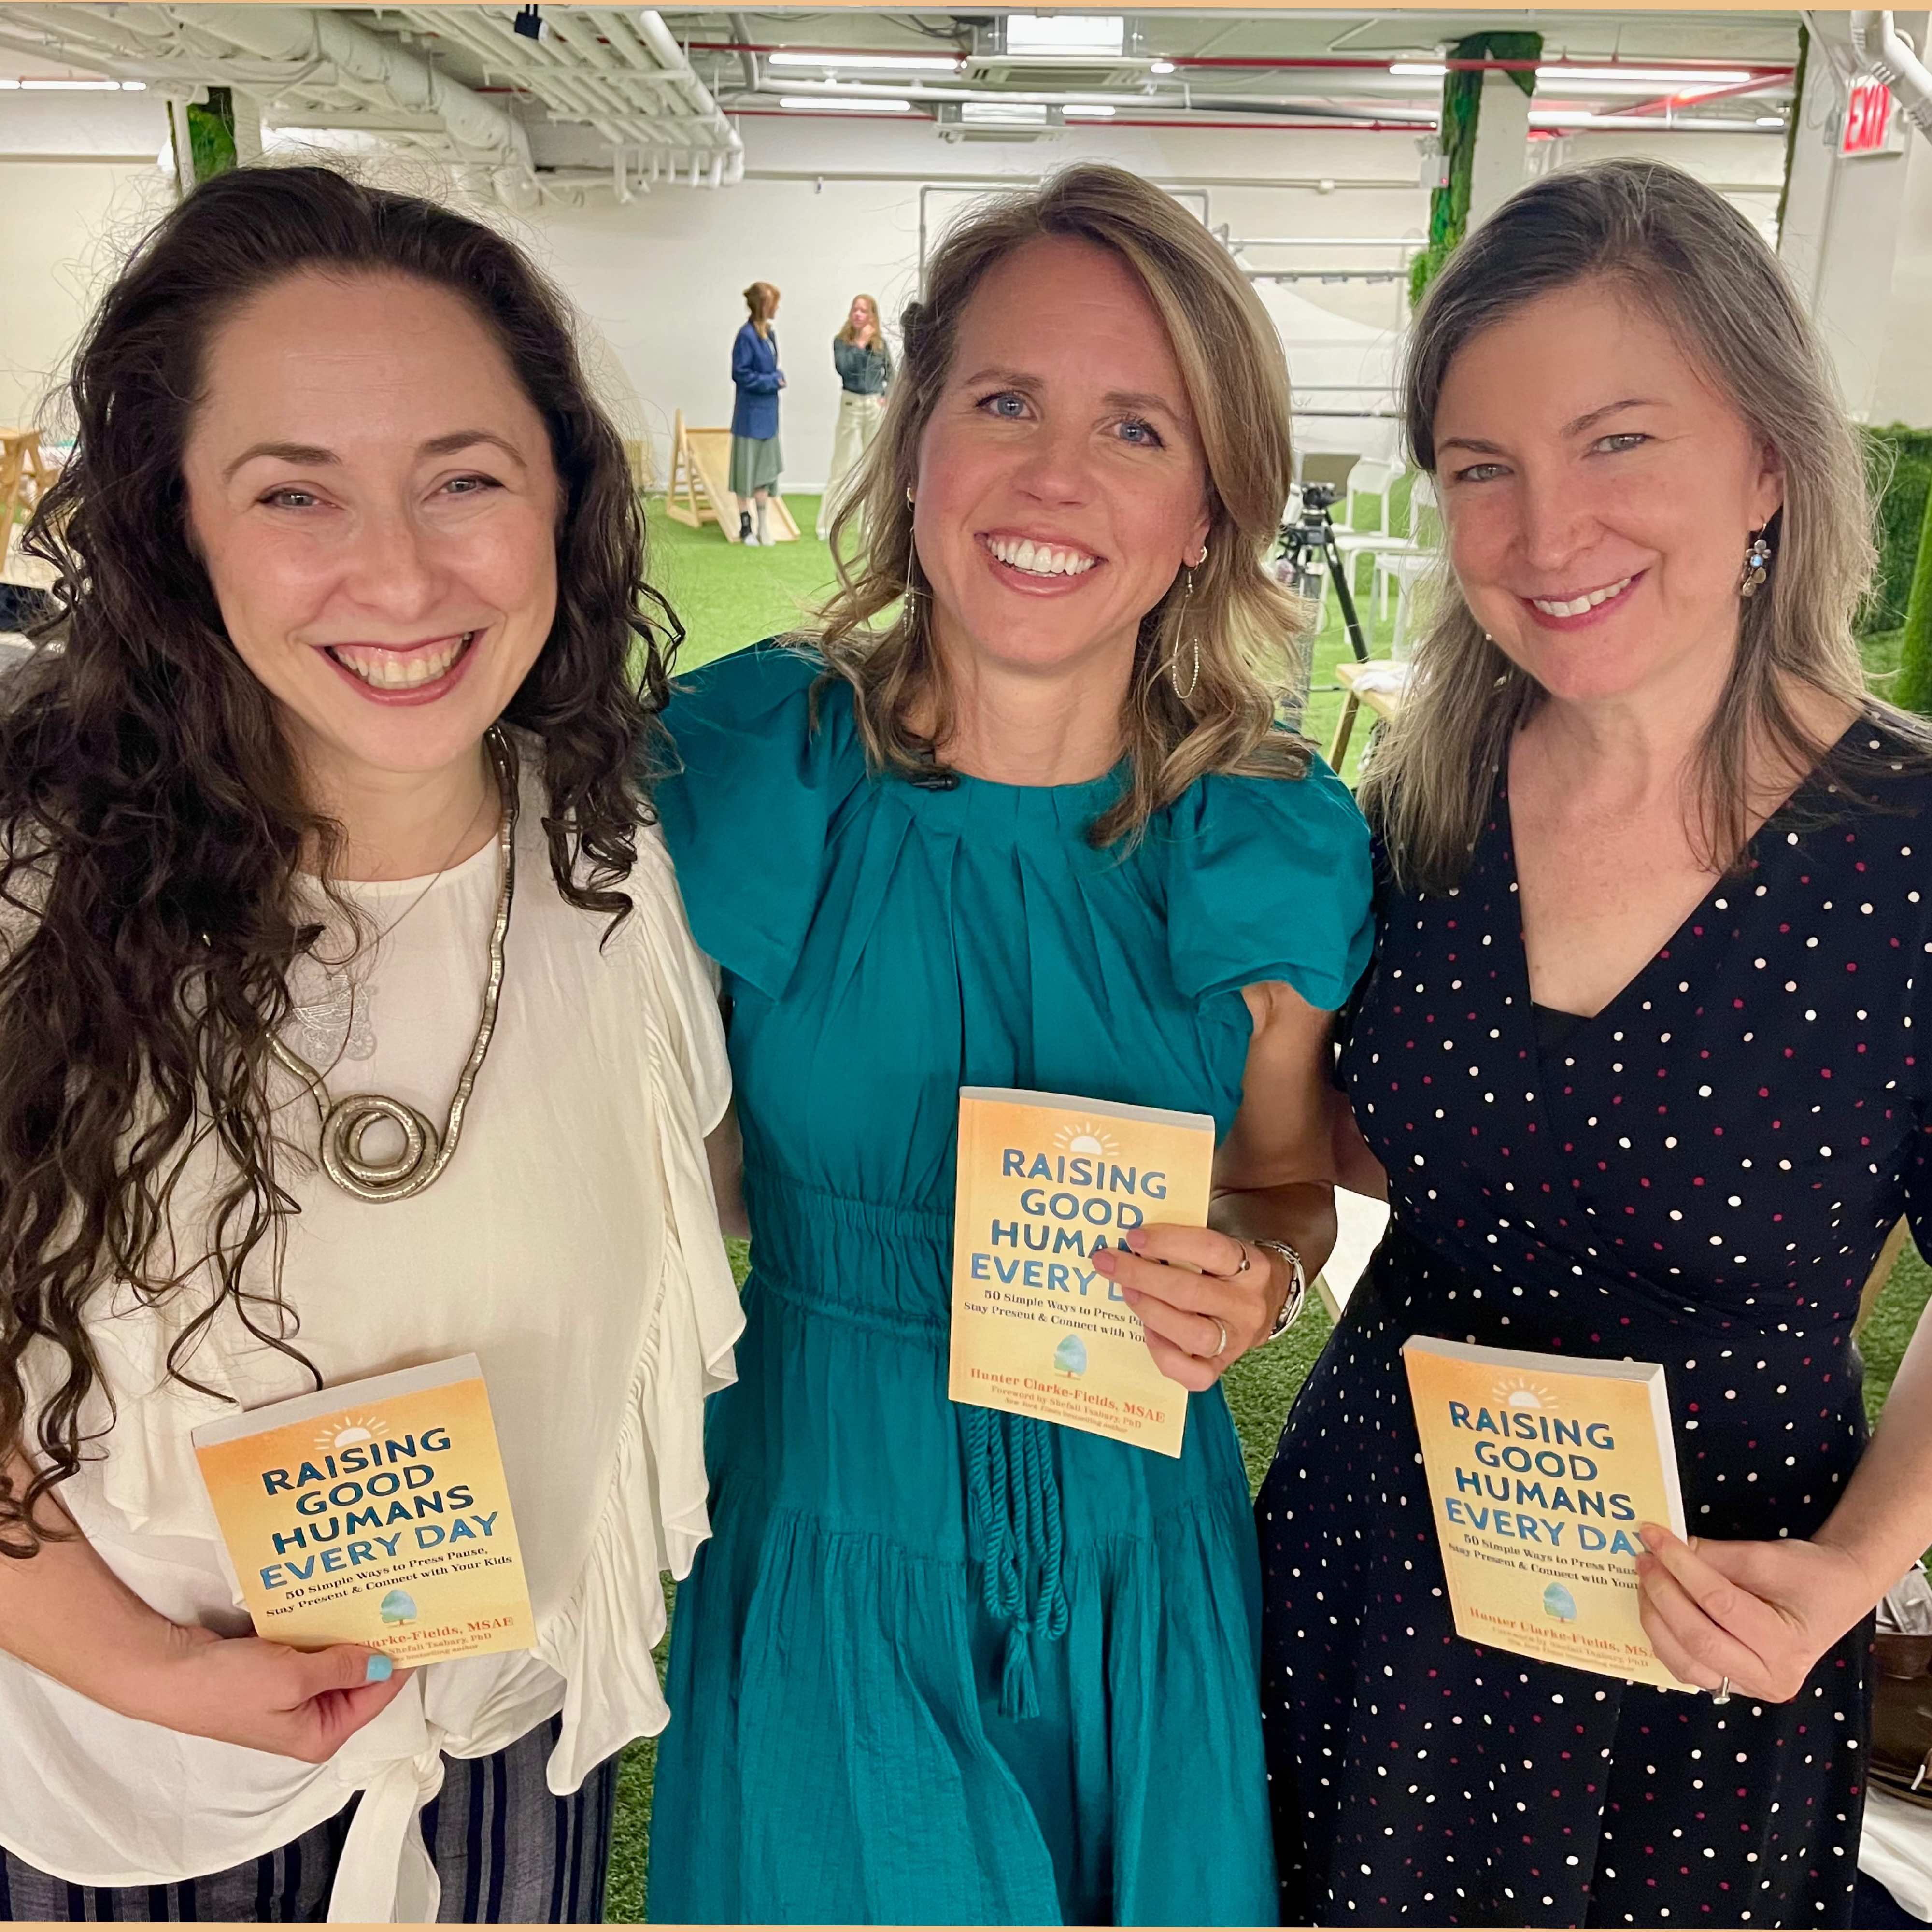 Mindful Mama Mentor Hunter Clarke-Fields (center) announces new parenting book: “Raising Good Humans Every Day - 50 Simple Ways to Press Pause, Stay Present and Connect with your Kids” at Cocoon NYC